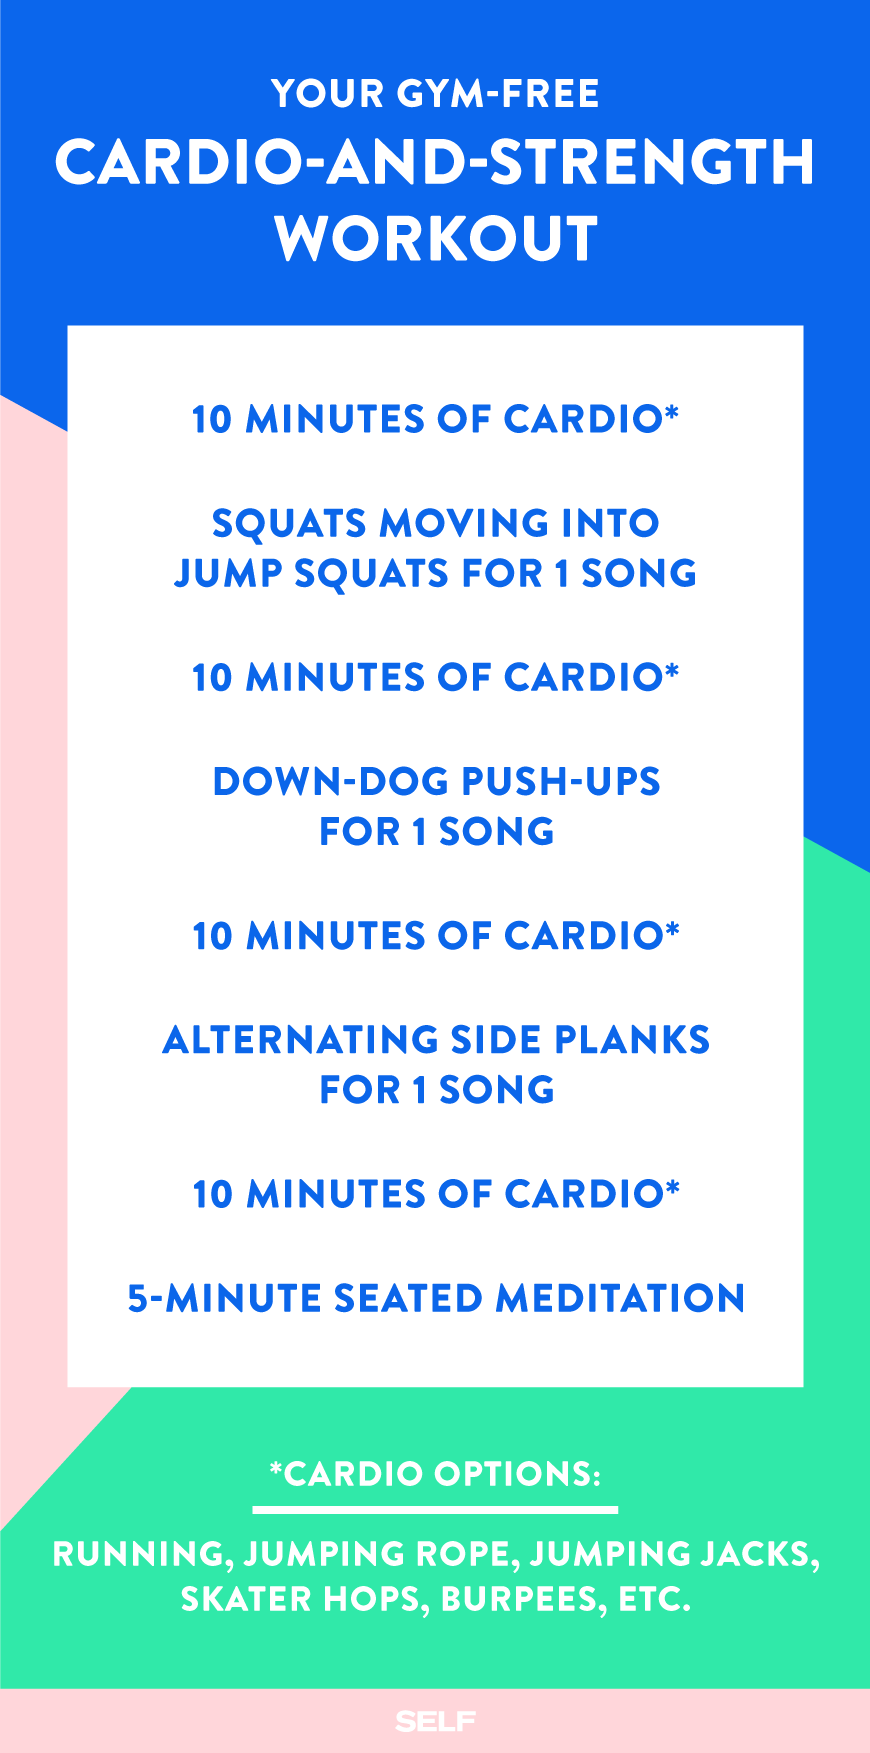 Cardio-and-strength-workout-new-yorkers_pinnable